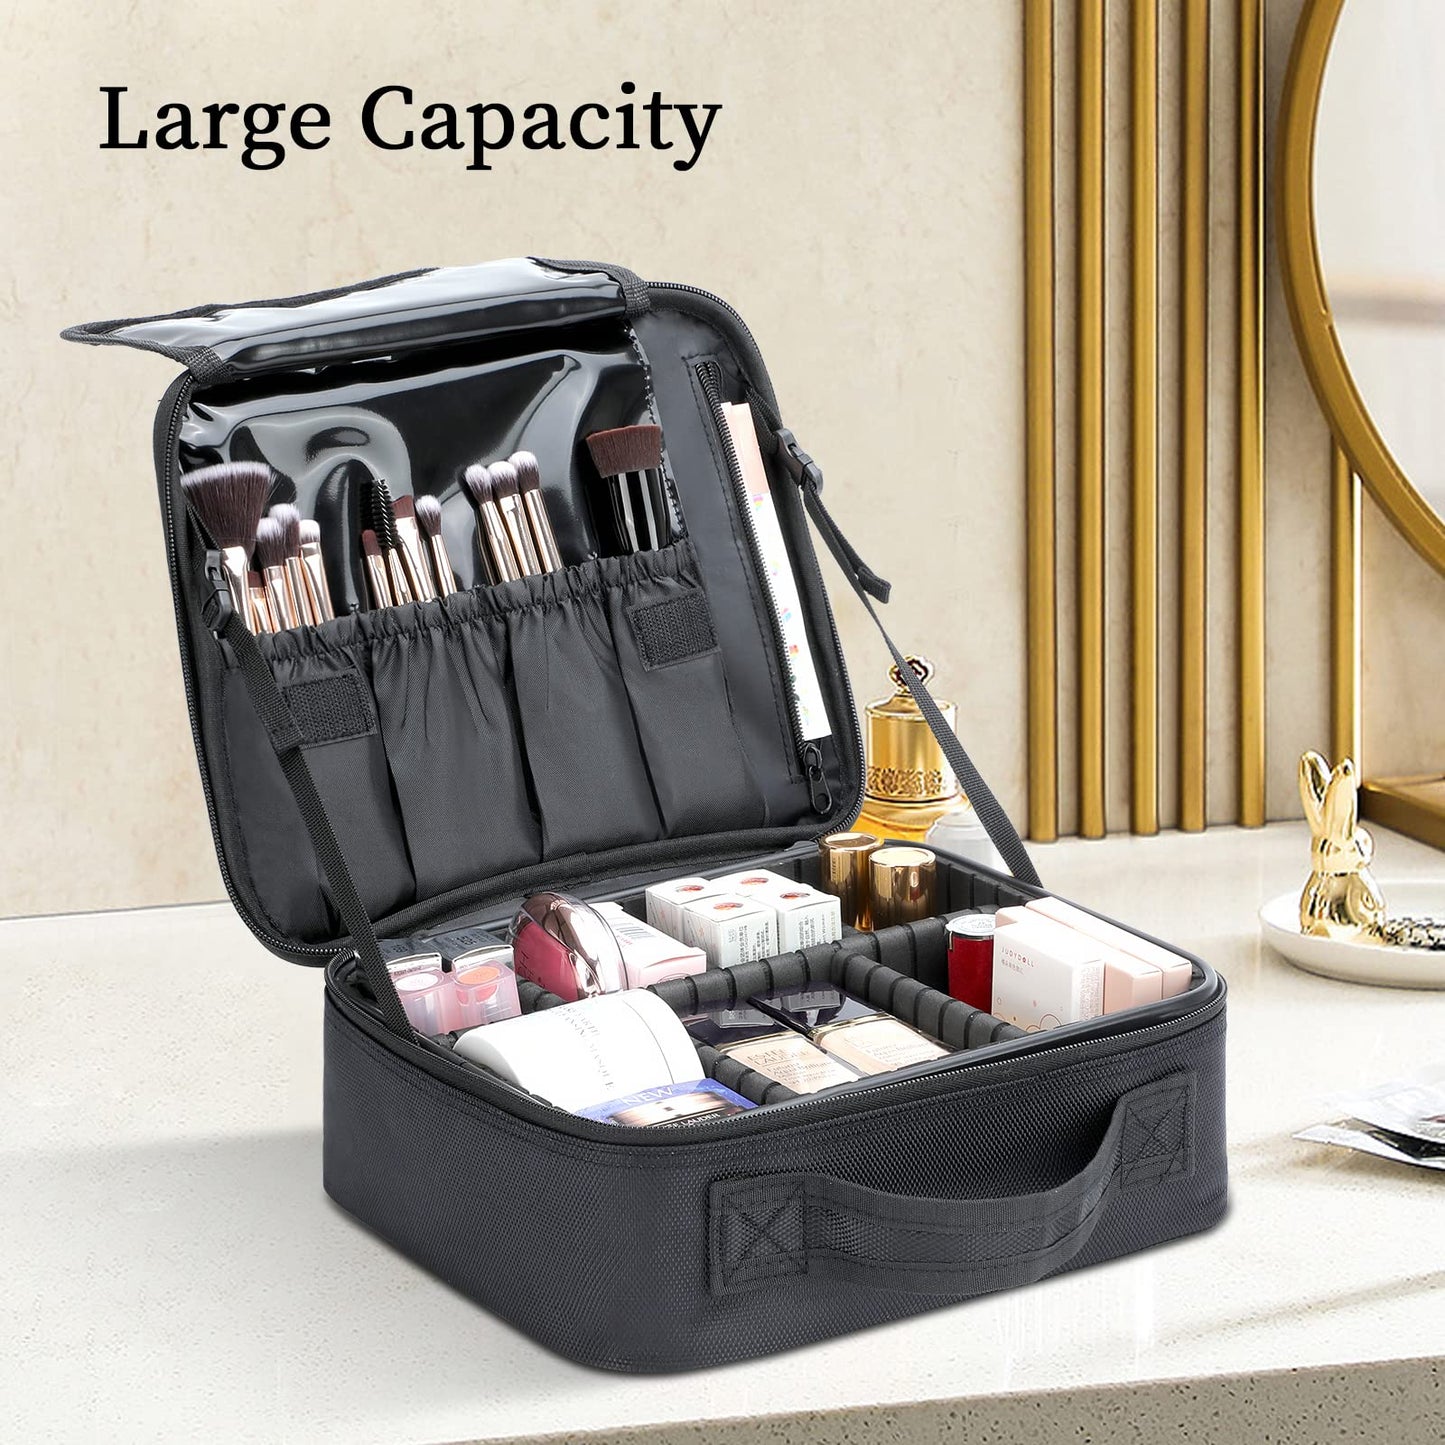 Travel Makeup Bag with Mirror, Cosmetics Organizer Bag, Travel Makeup Train Case & Adjustable Dividers, Professional Cosmetic Accessories Case, Portable Travel Case Waterproof and Durable (Black)